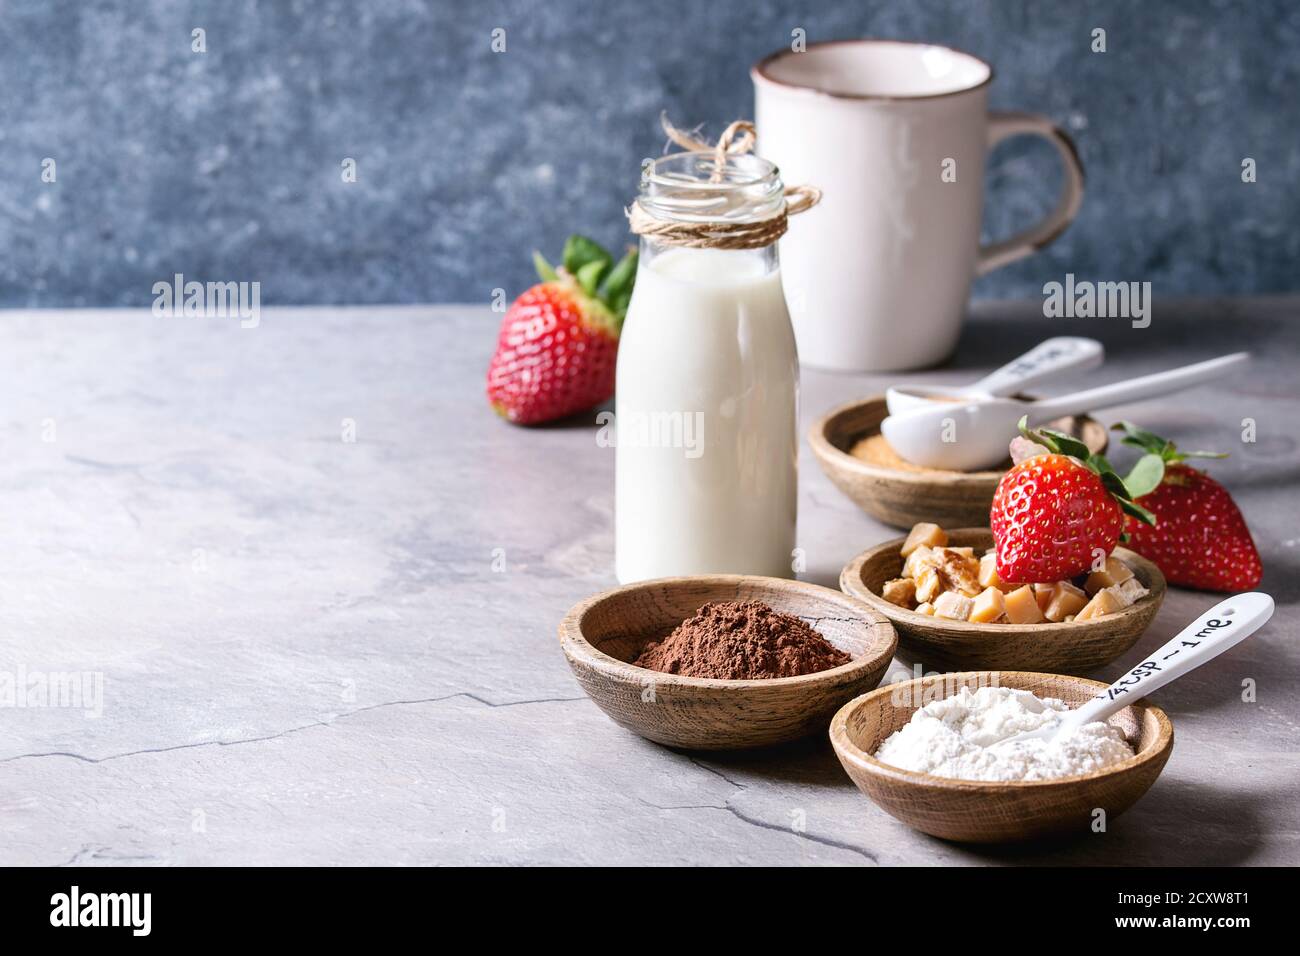 Ingredients for cooking chocolate mug cakes. Flour, cocoa powder, sugar, caramel in wooden bowls, milk, strawberries and mint served with spoons and m Stock Photo